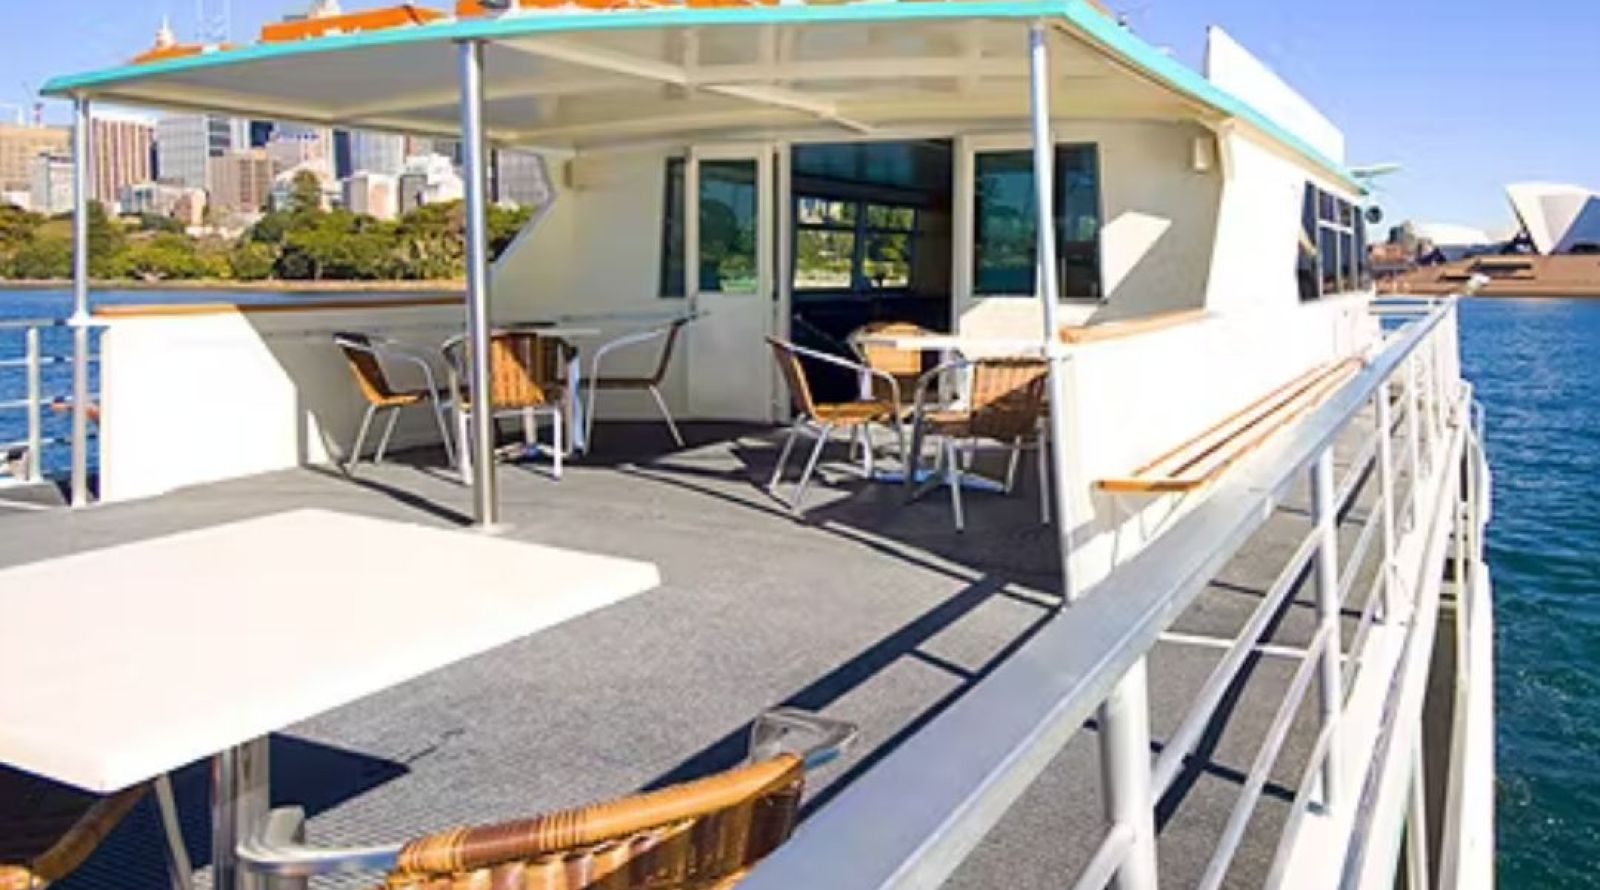 Jerry Bailey Boat Hire - Outdoor rear deck